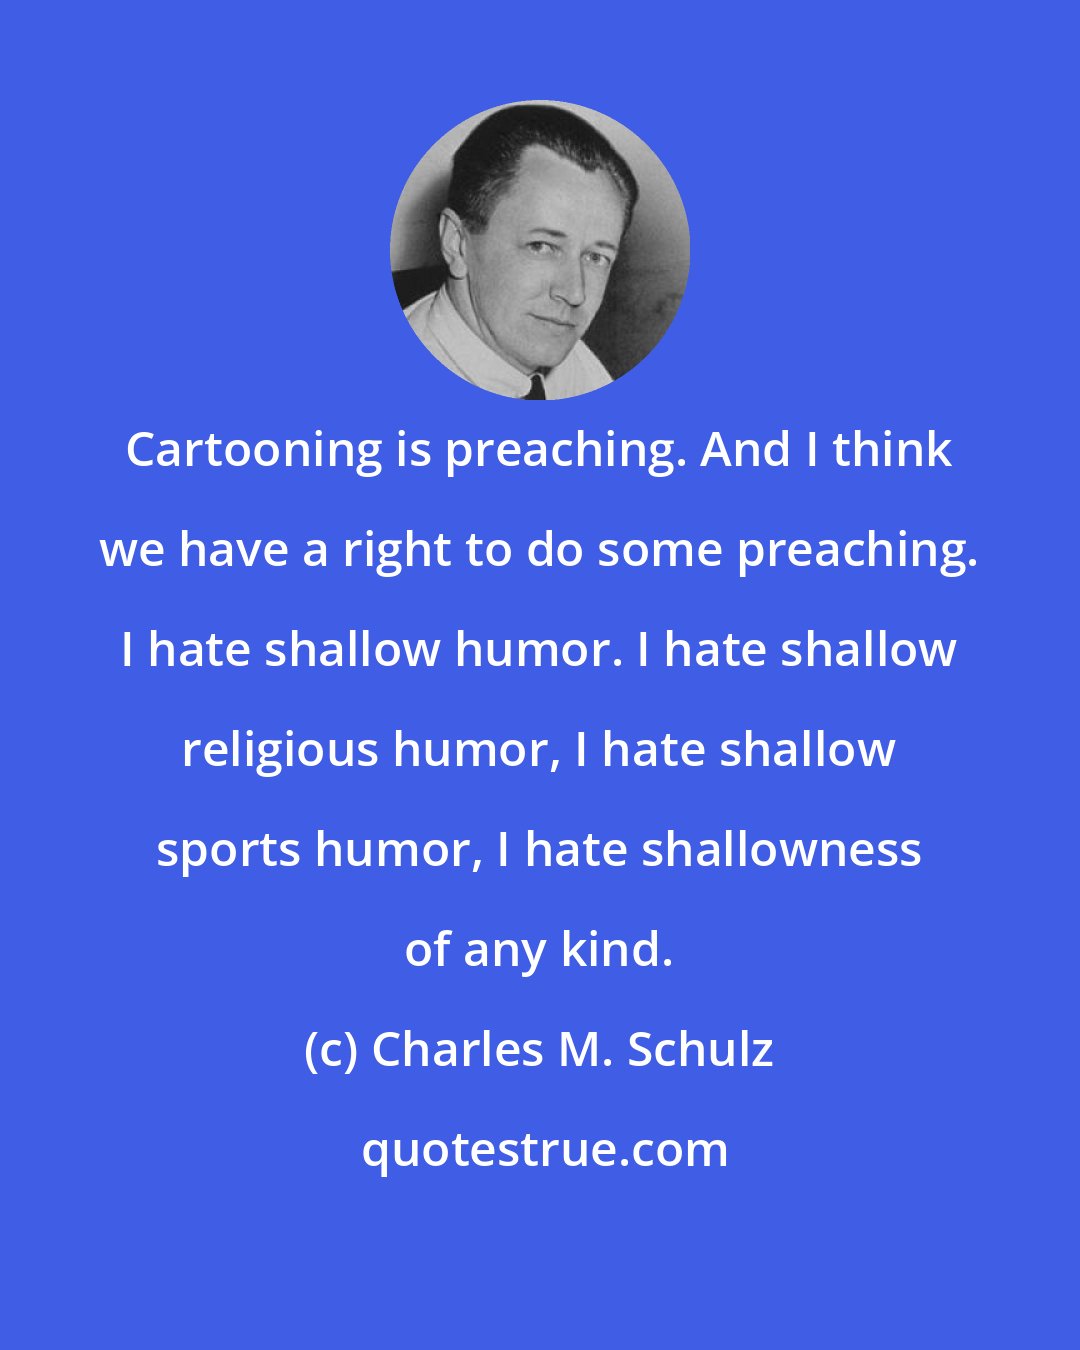 Charles M. Schulz: Cartooning is preaching. And I think we have a right to do some preaching. I hate shallow humor. I hate shallow religious humor, I hate shallow sports humor, I hate shallowness of any kind.